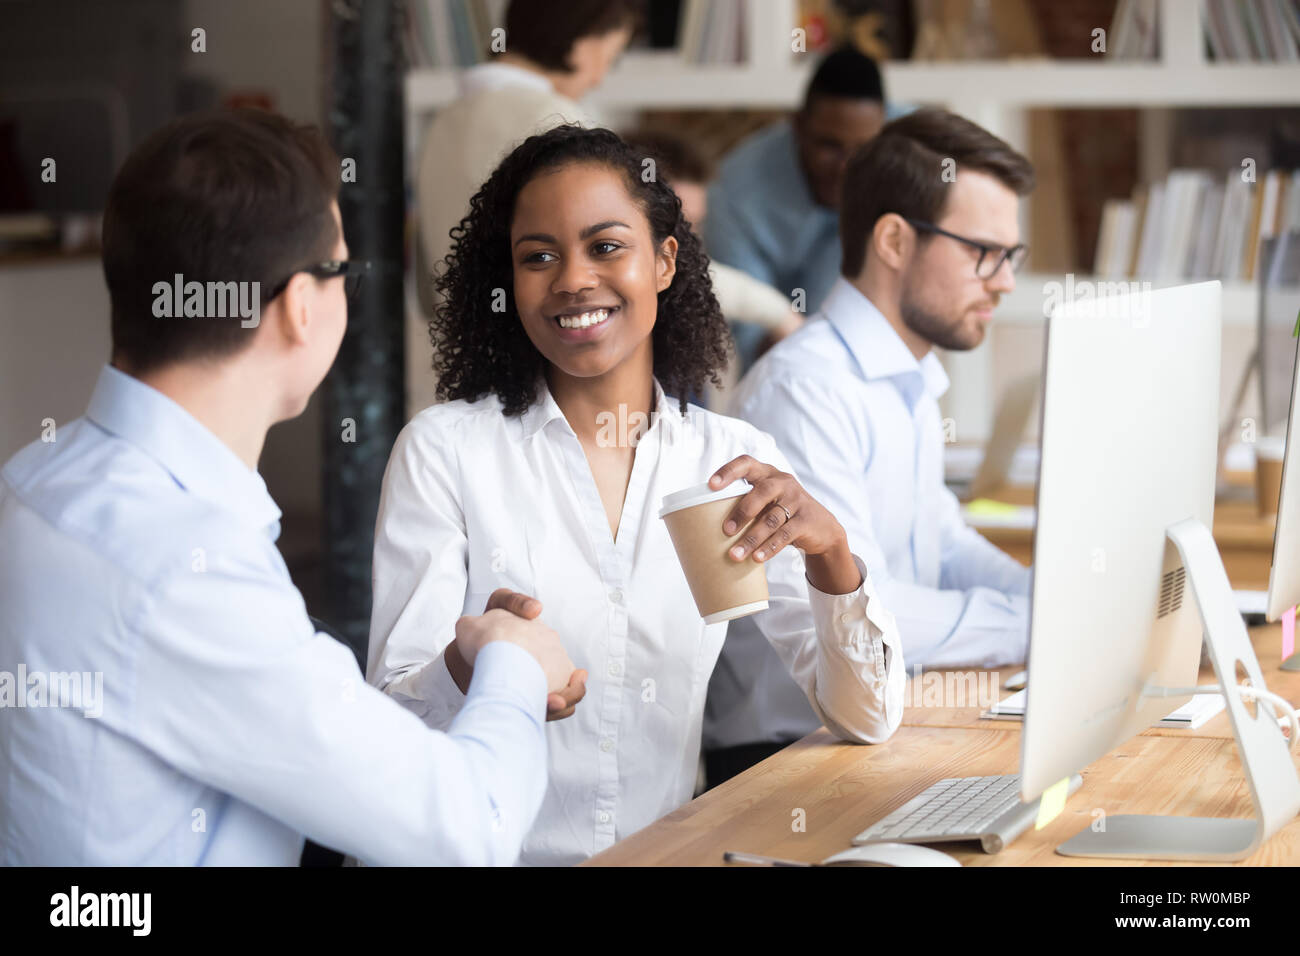 Diverse workers greeting each other shaking hands in coworking office Stock Photo